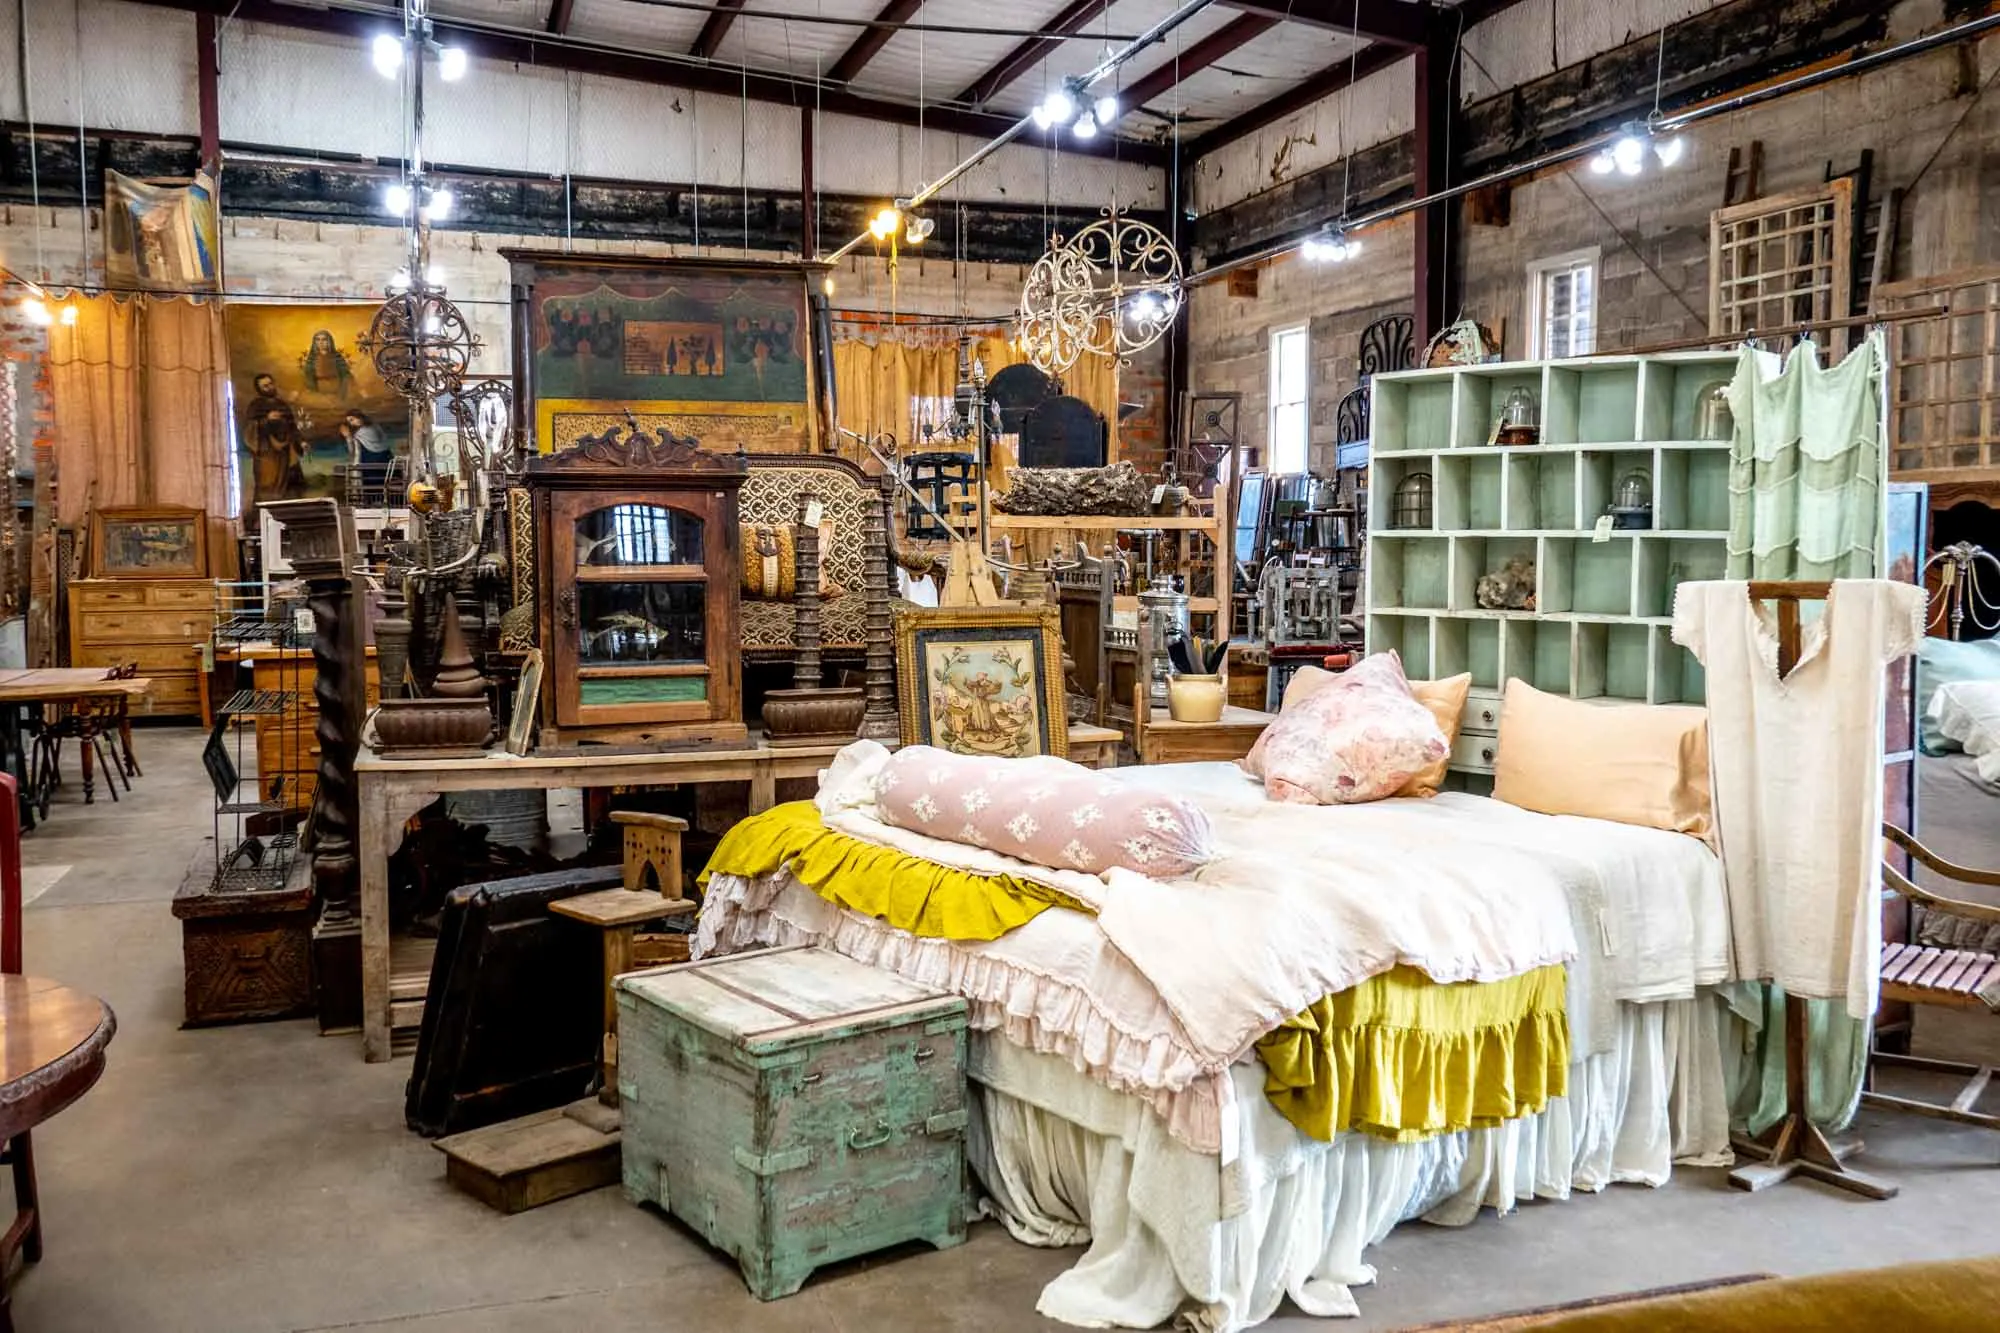 Bed and an assortment of antiques in a showroom.